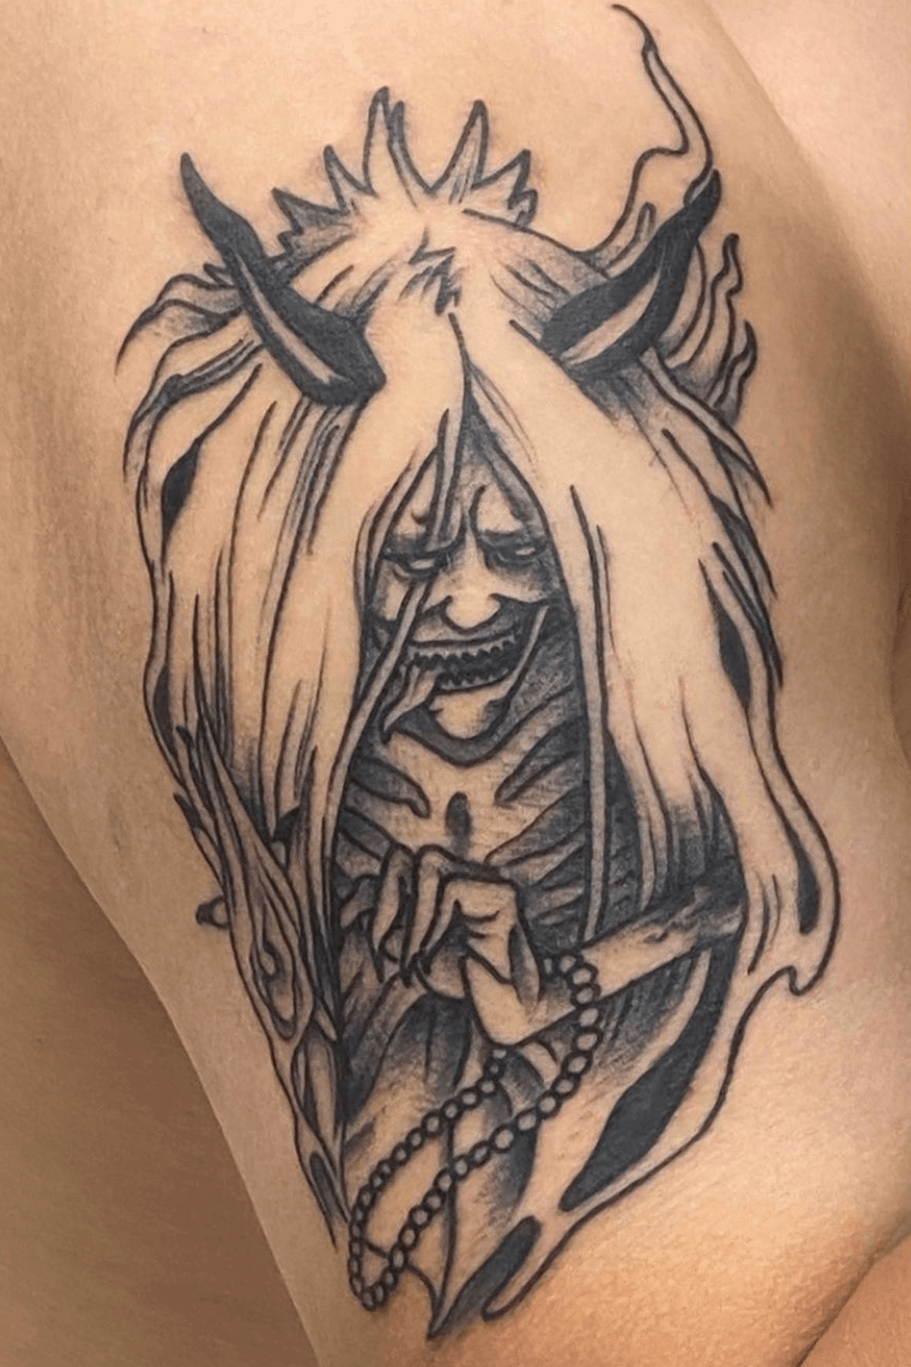 Tattooed this Reaper Death Seal today Just wanted to share  rNaruto